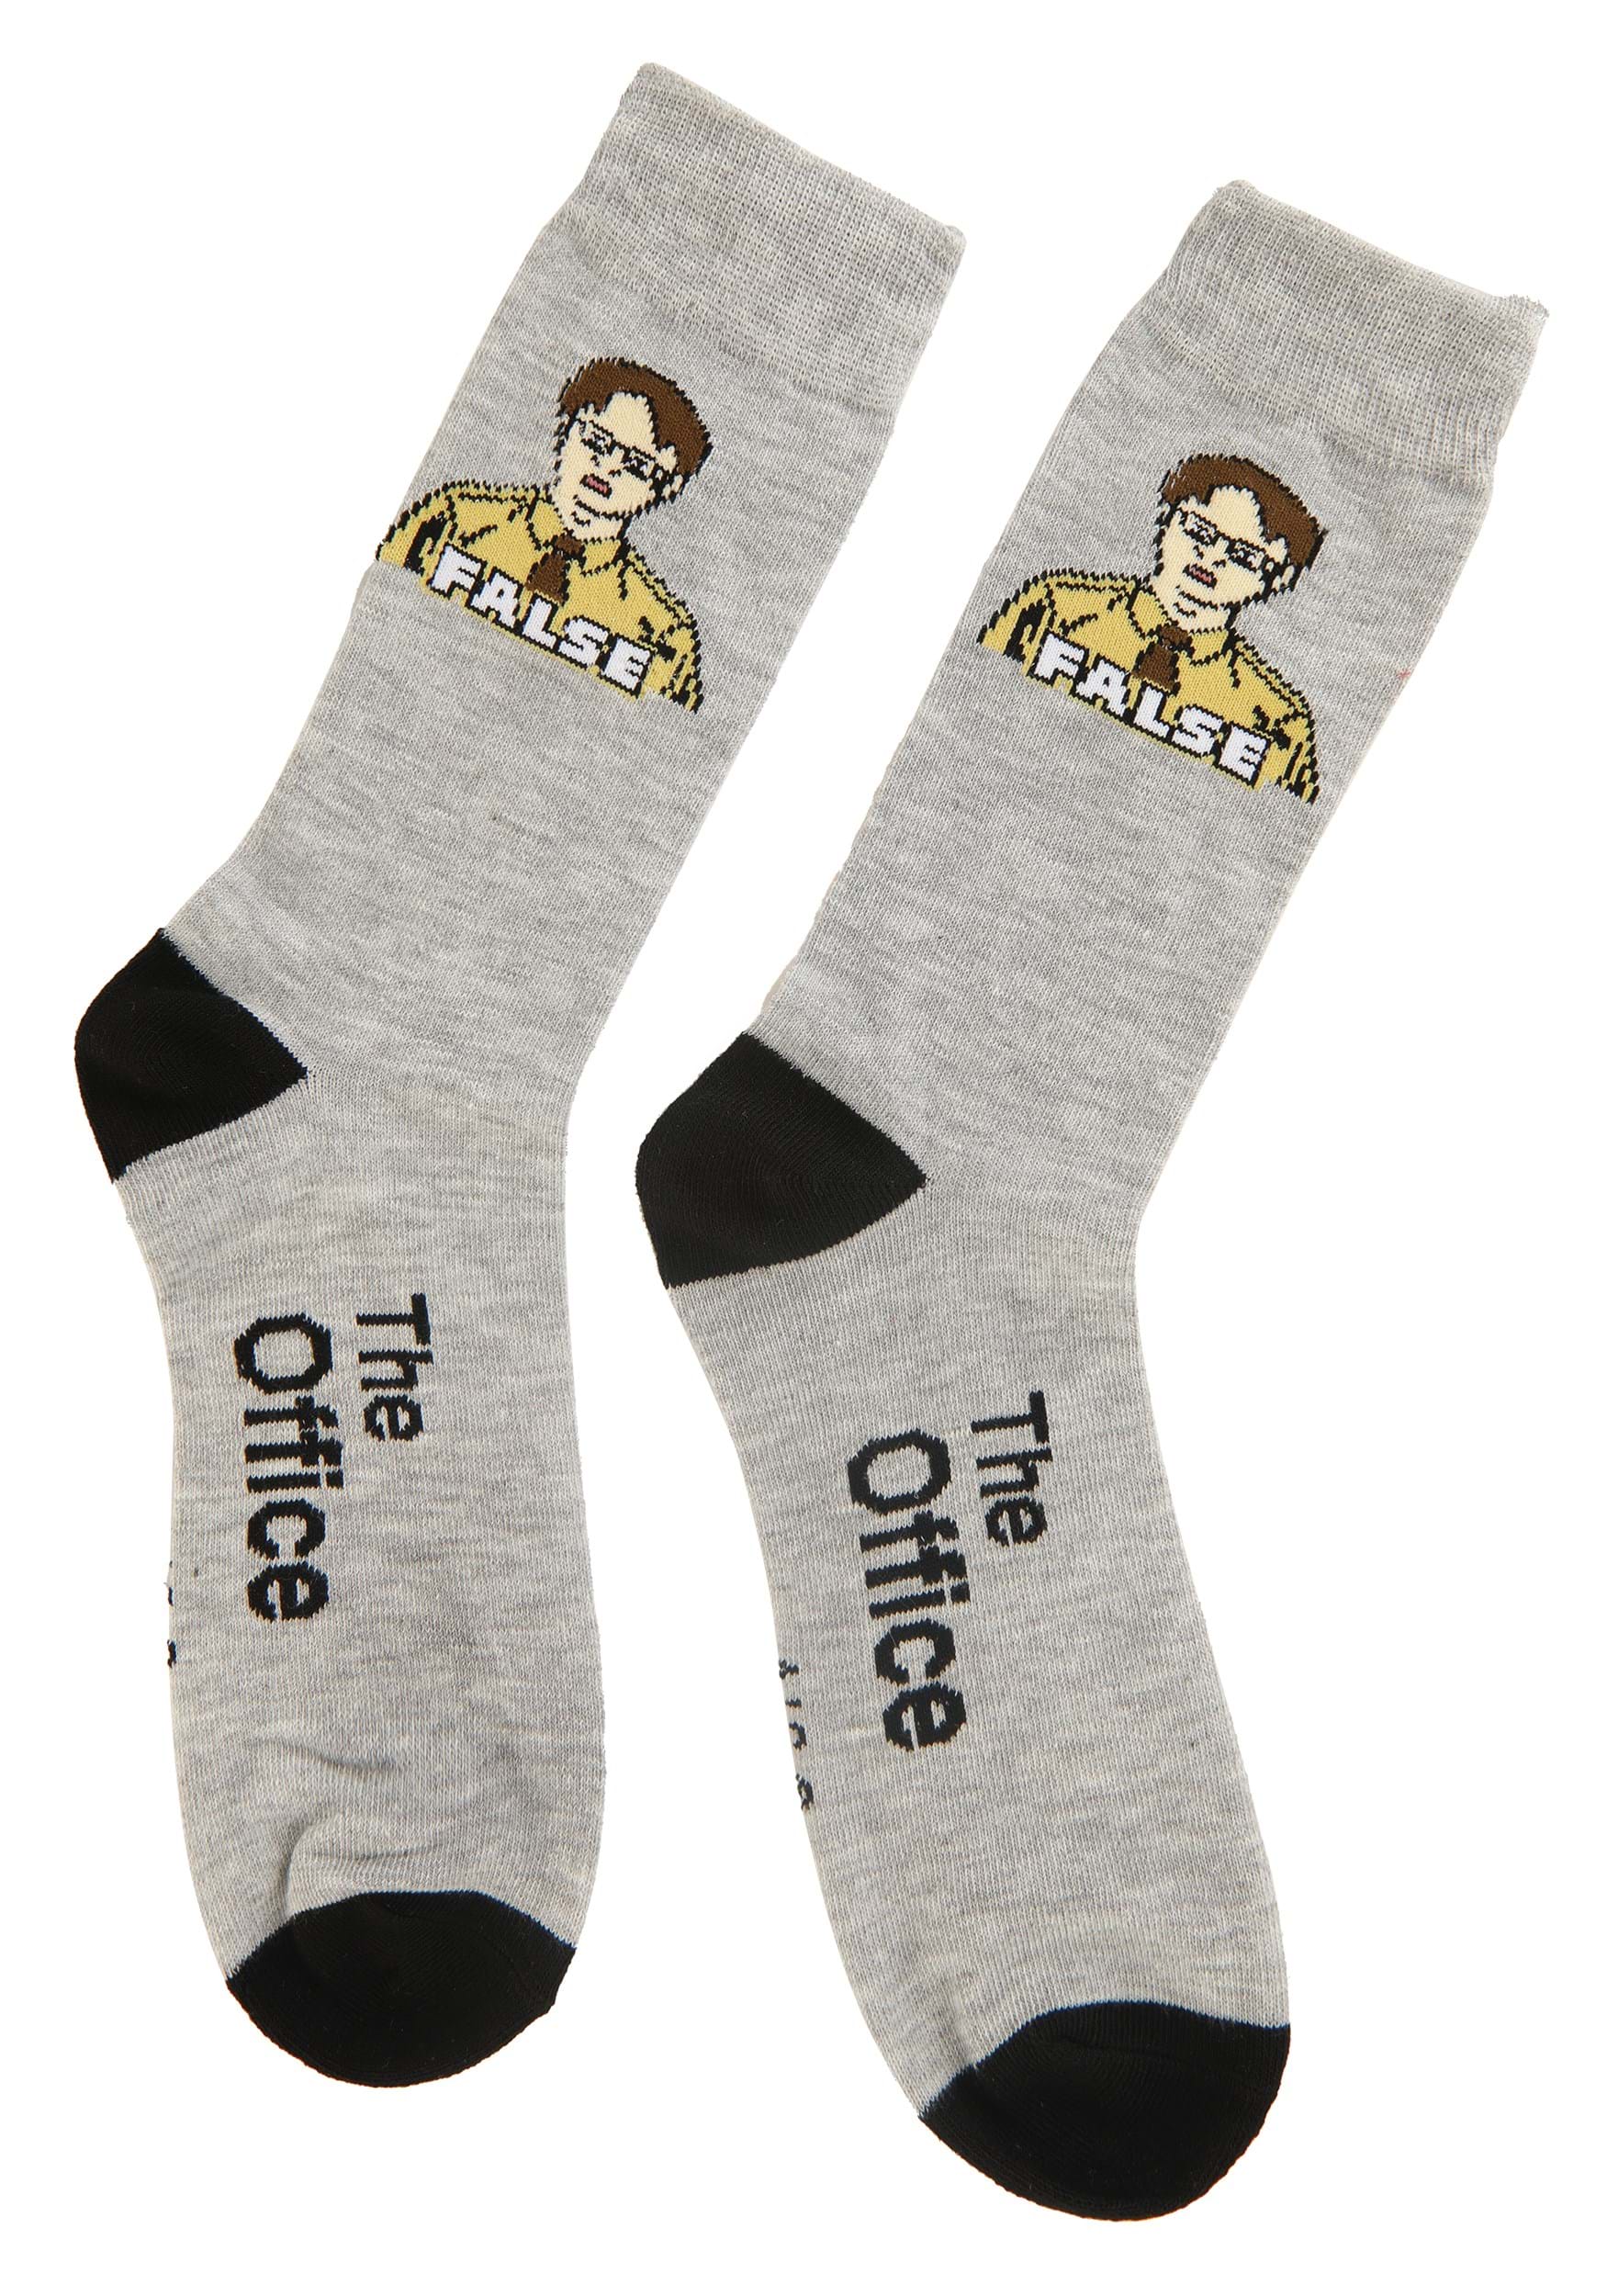 Dwight from The Office False Crew Socks